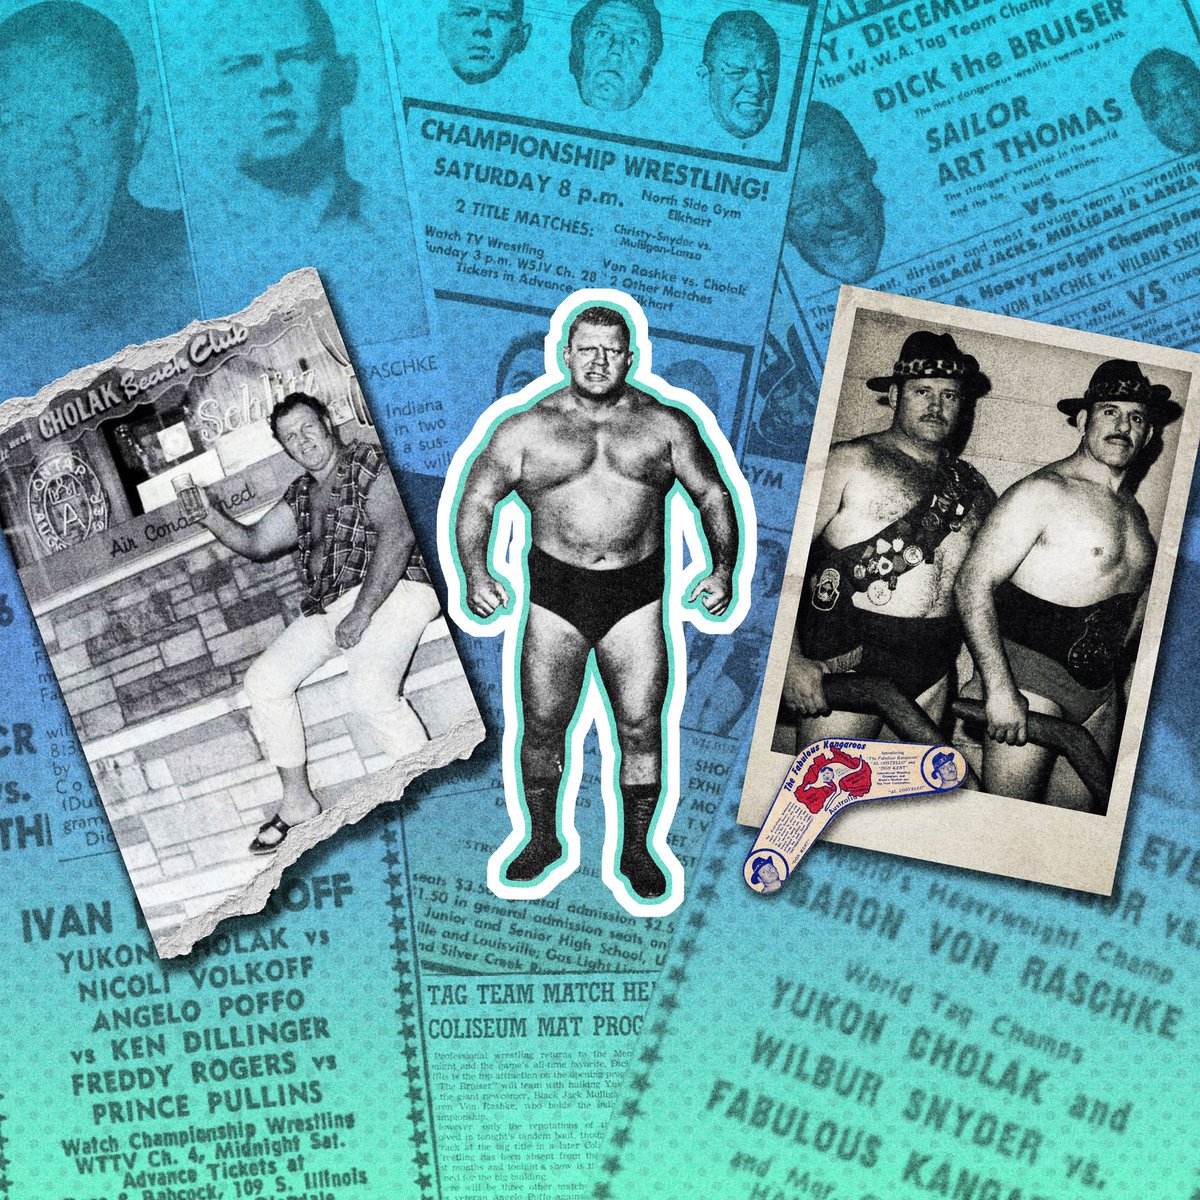 A new episode of Charting the Territories has arrived! Join @AlGetzWrestling and I as we talk the WWA in 1971, Moose Cholak, the Costello/Kent Fabulous Kangaroos, the Detroit turf war with The Sheik and much, much more! Find it wherever you find your podcasts!